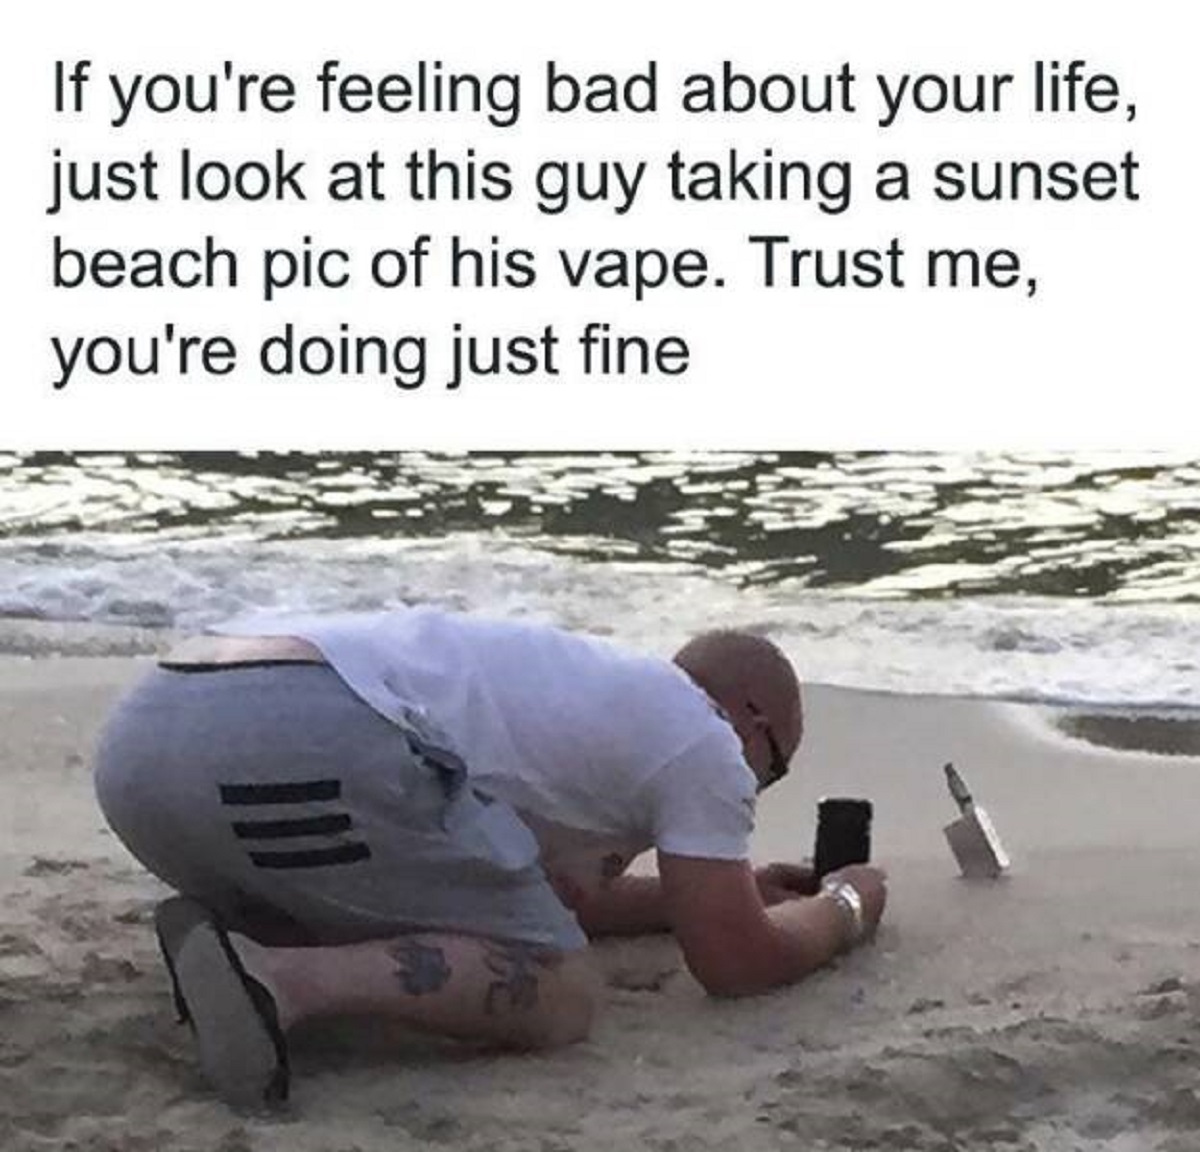 sand - If you're feeling bad about your life, just look at this guy taking a sunset beach pic of his vape. Trust me, you're doing just fine